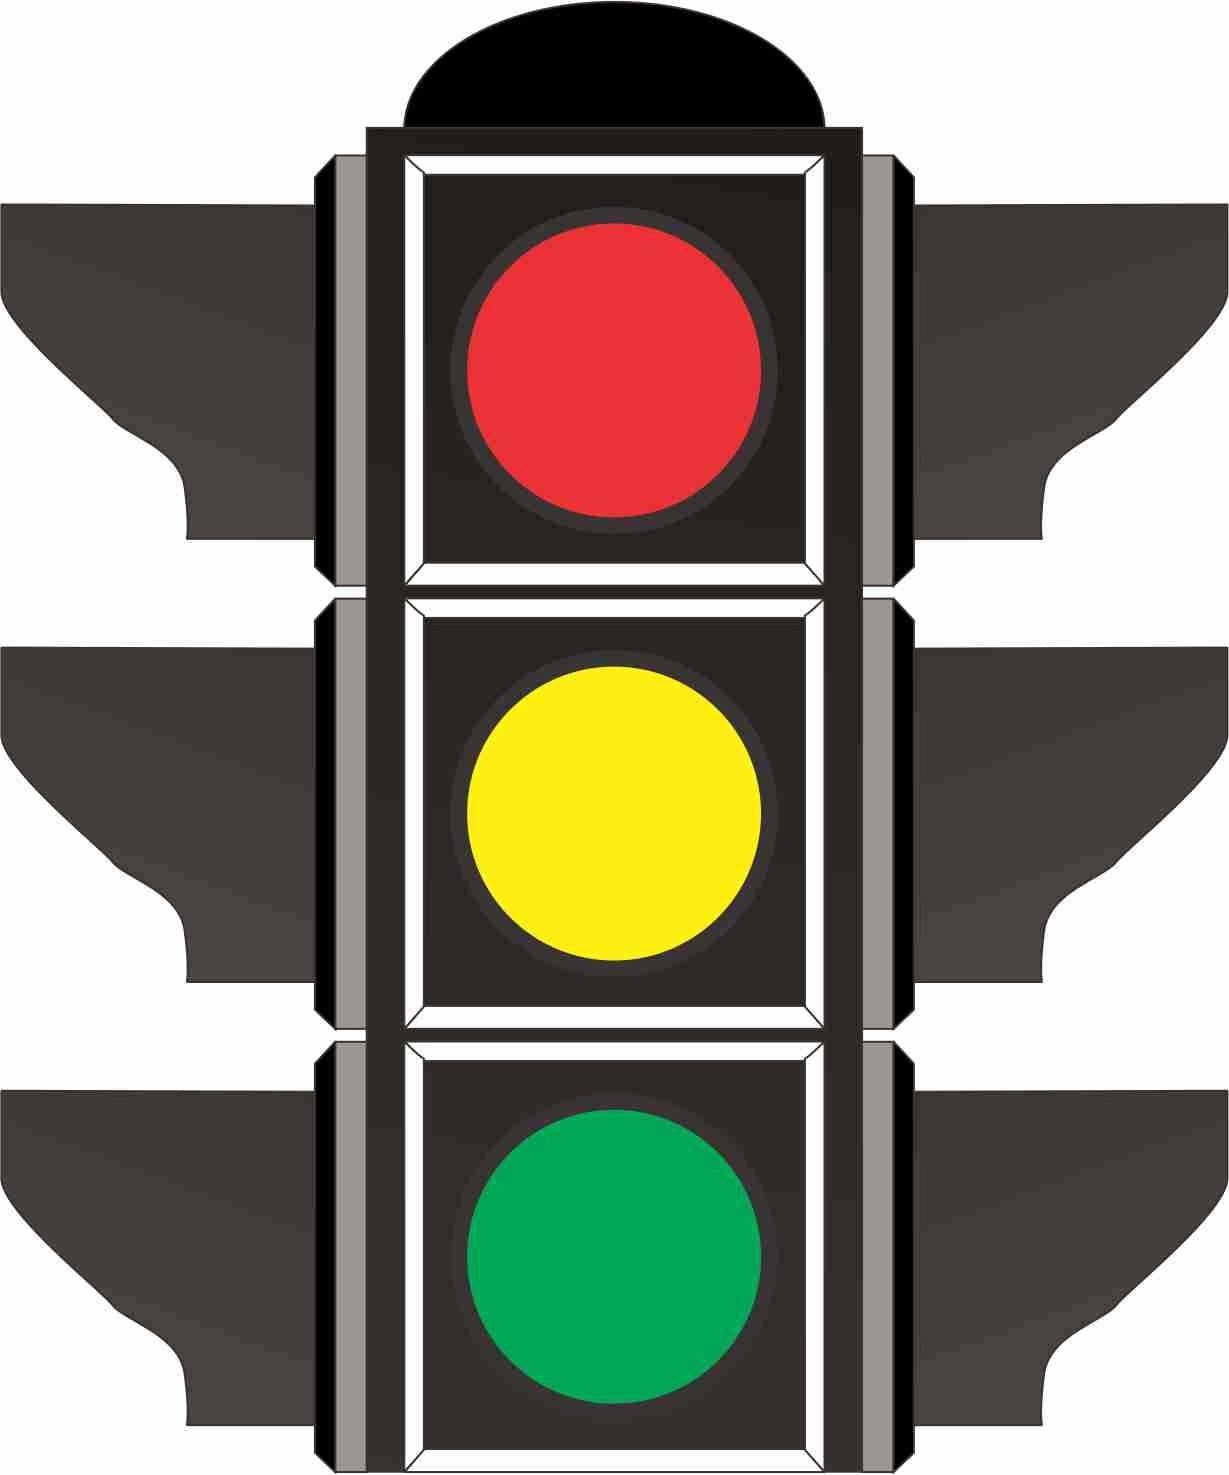 coreldraw tutorial new simple: How To Draw Traffic Light With Corel draw